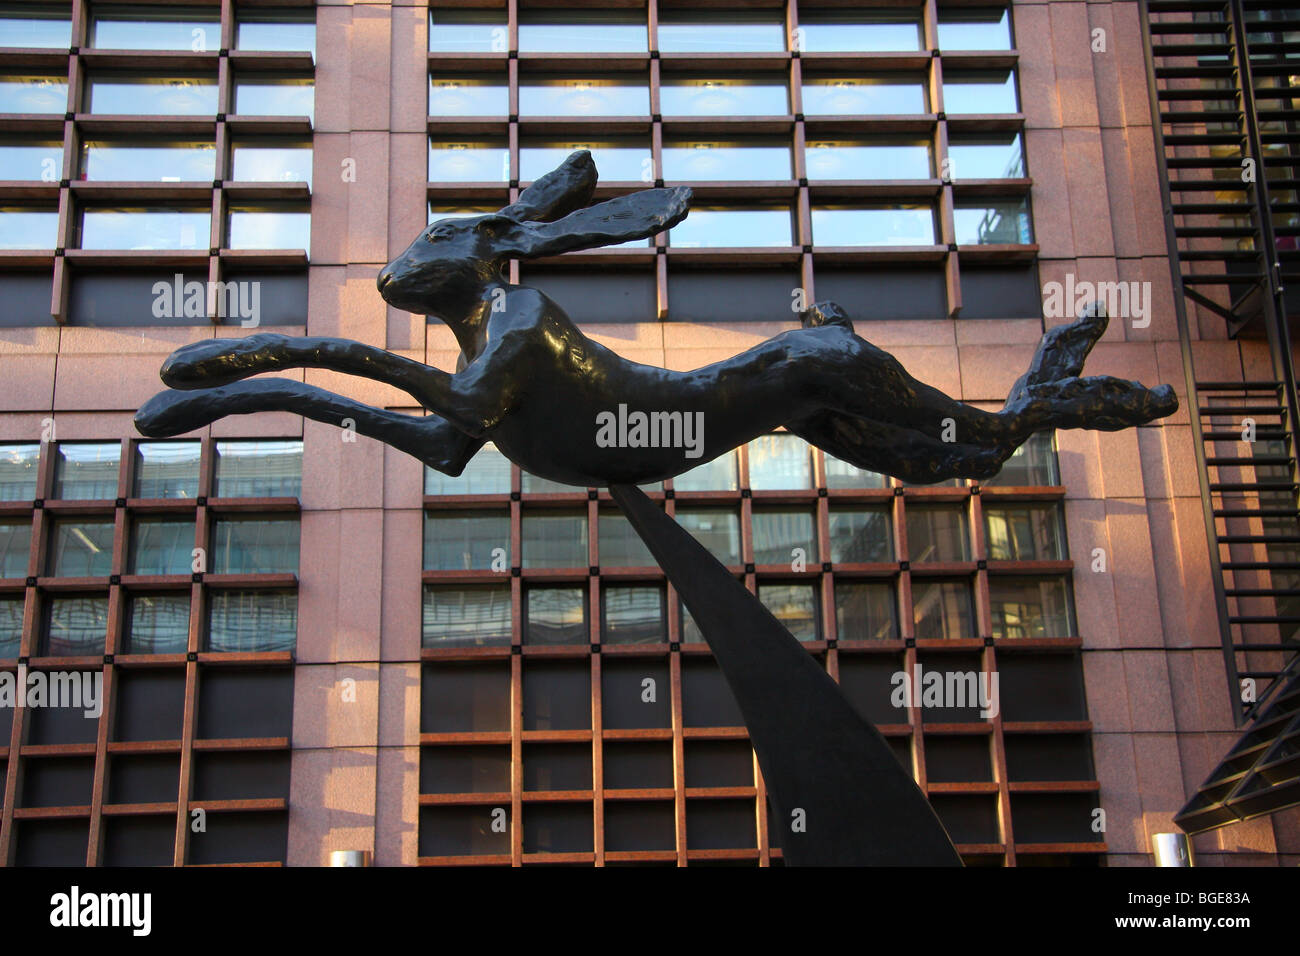 Supported by his vertical crescent is the Leaping Hare by the late Barry Flanagan, situated at Broadgate Circus. Stock Photo